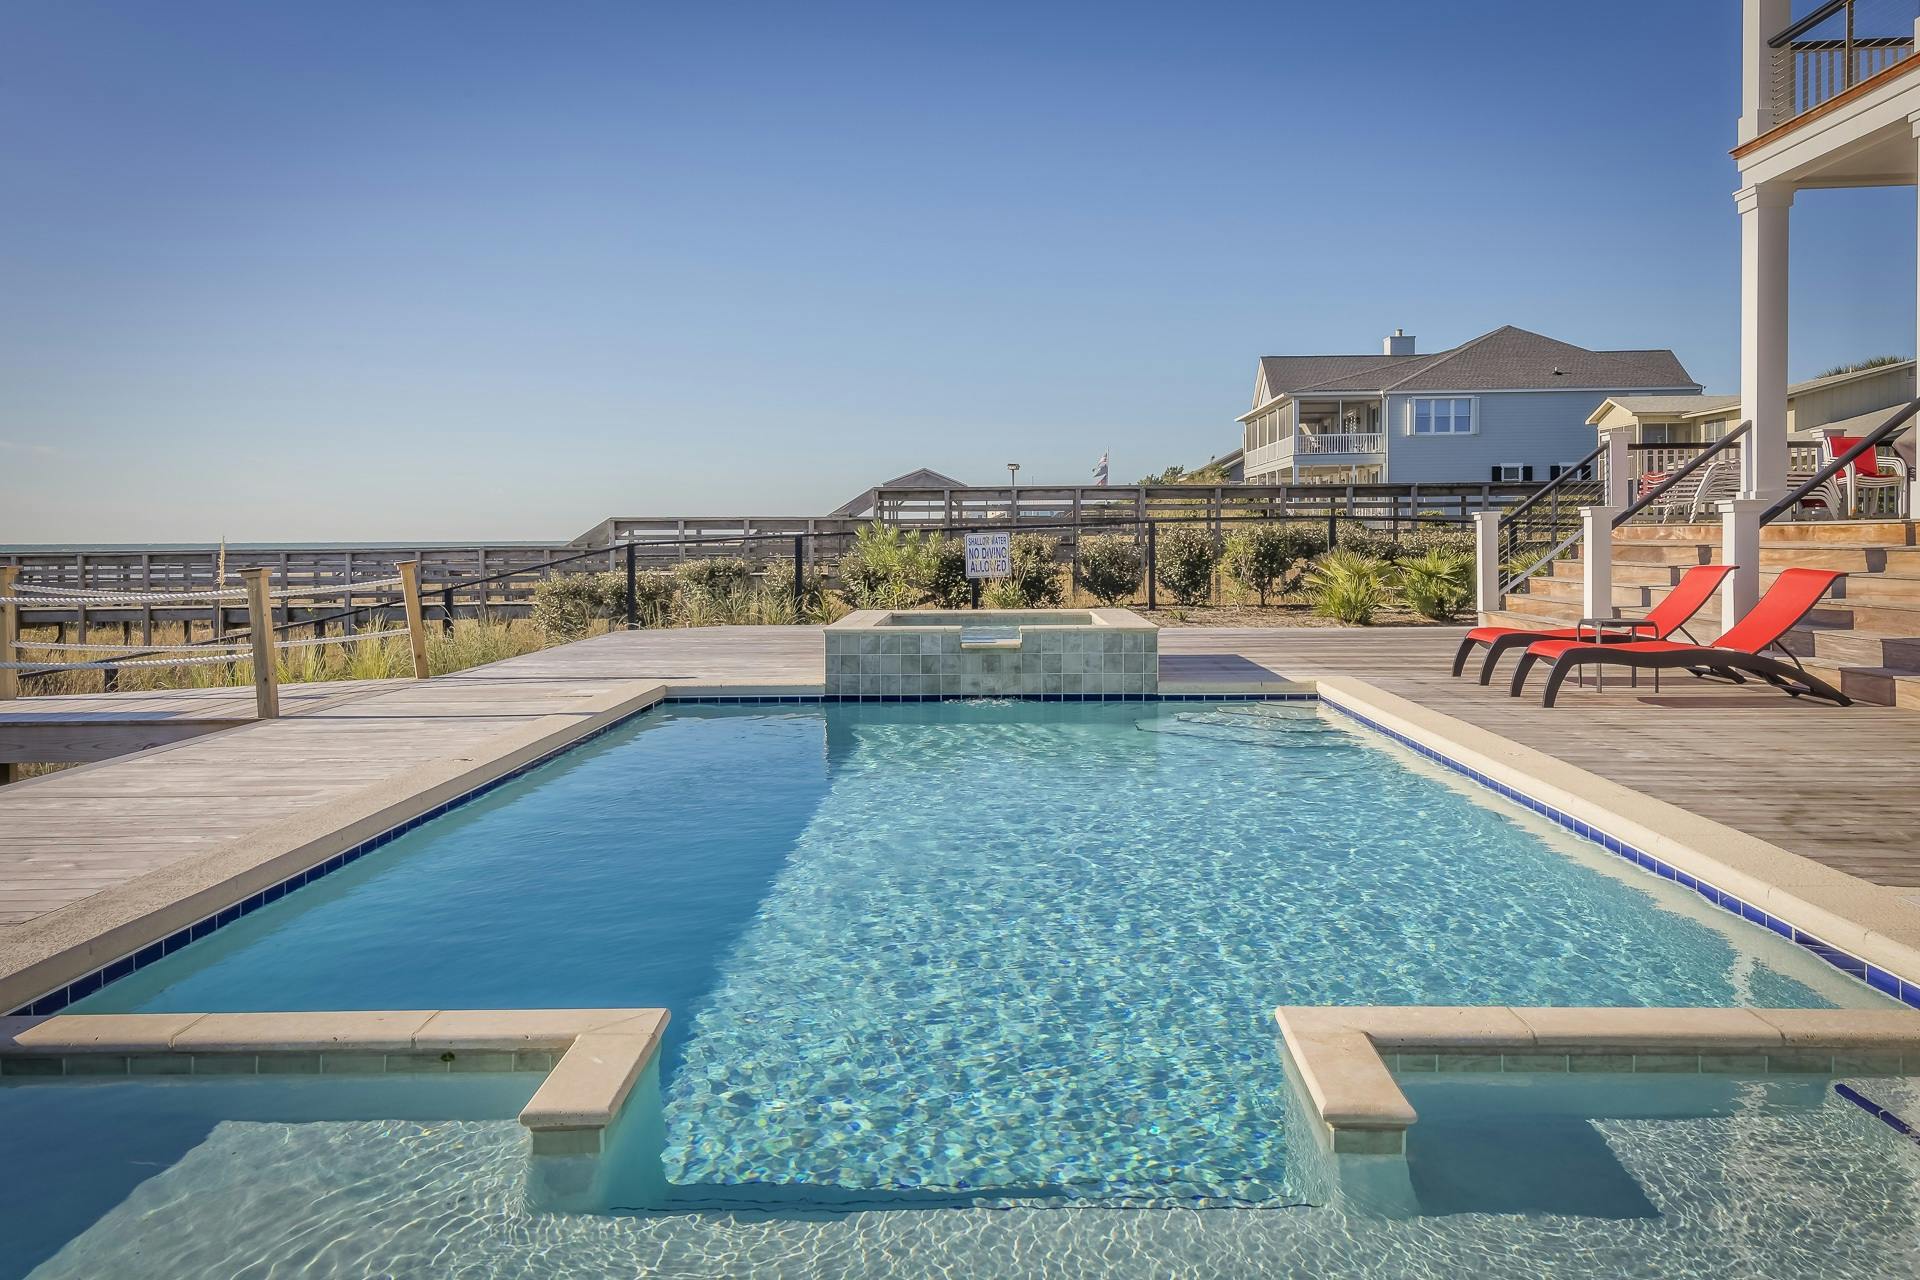 Trinity Pools and Spas can make the most of your backyard with a concrete pool.